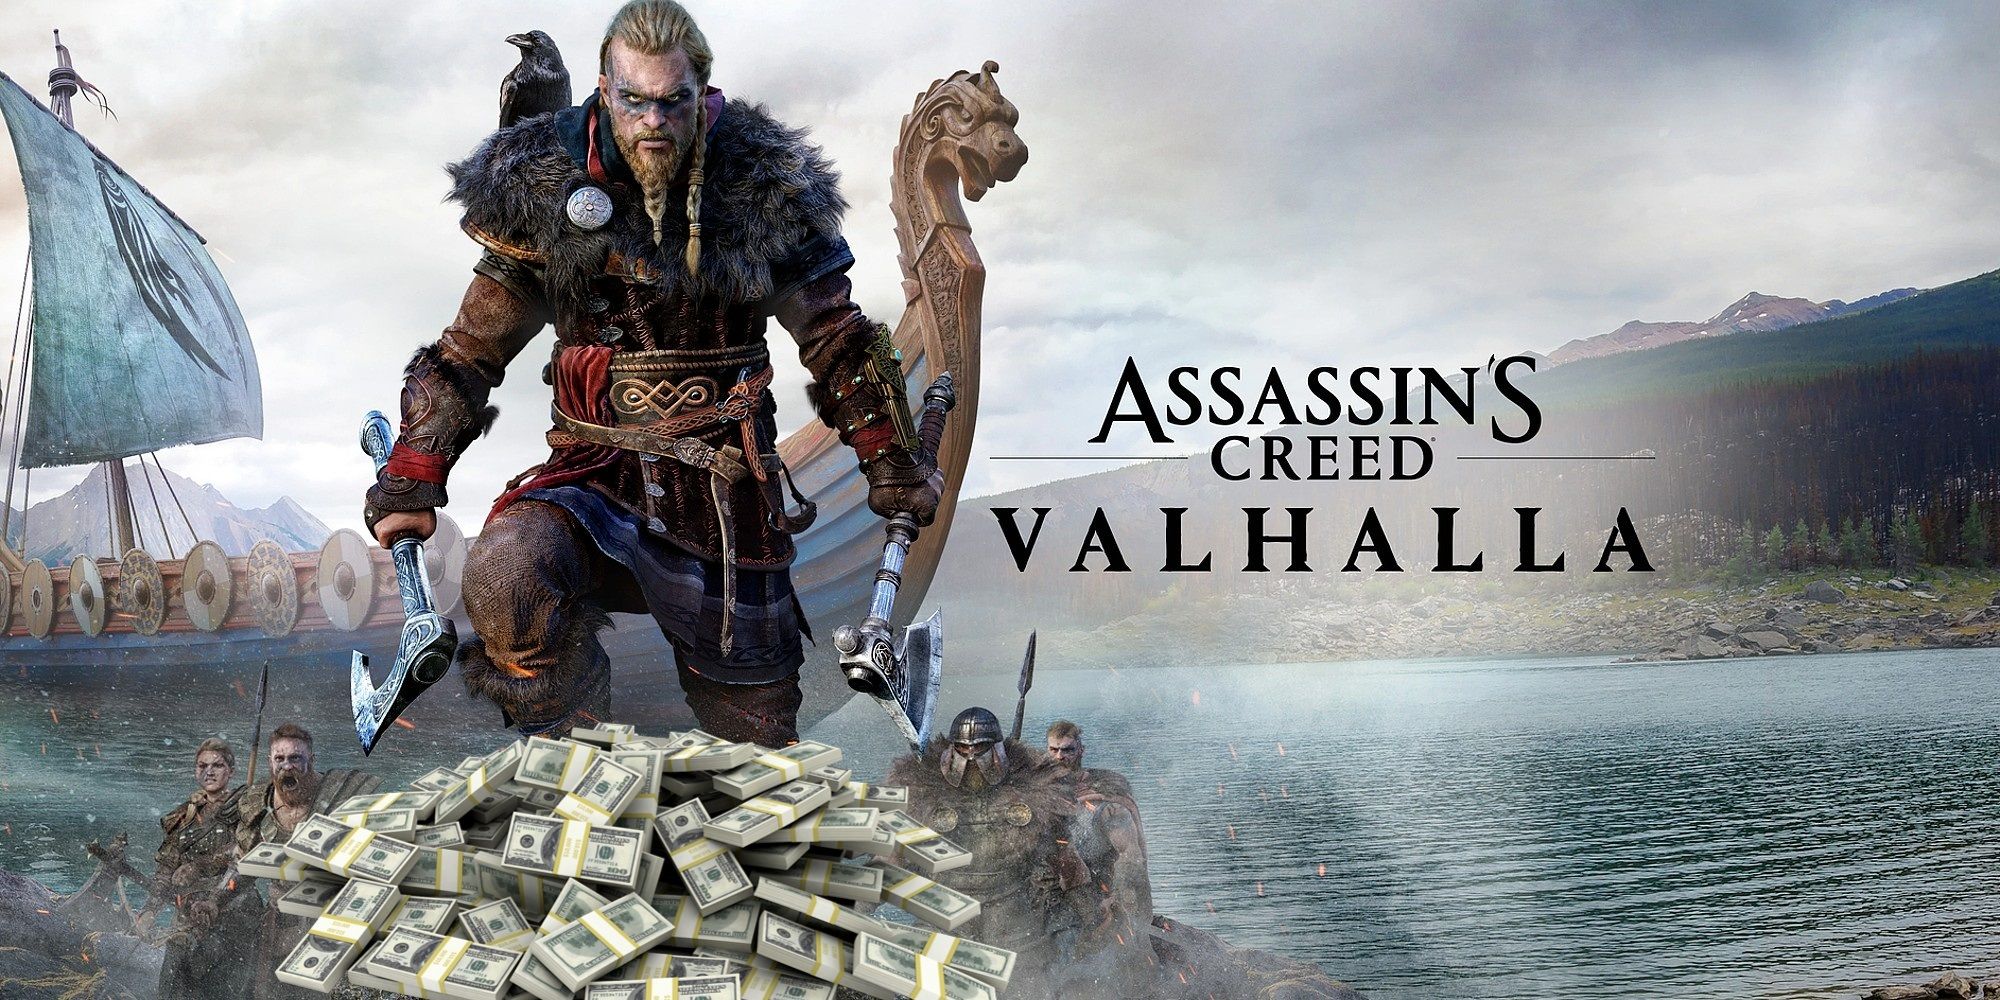 Assassin's Creed Valhalla Steam achievements are a no, says Ubisoft